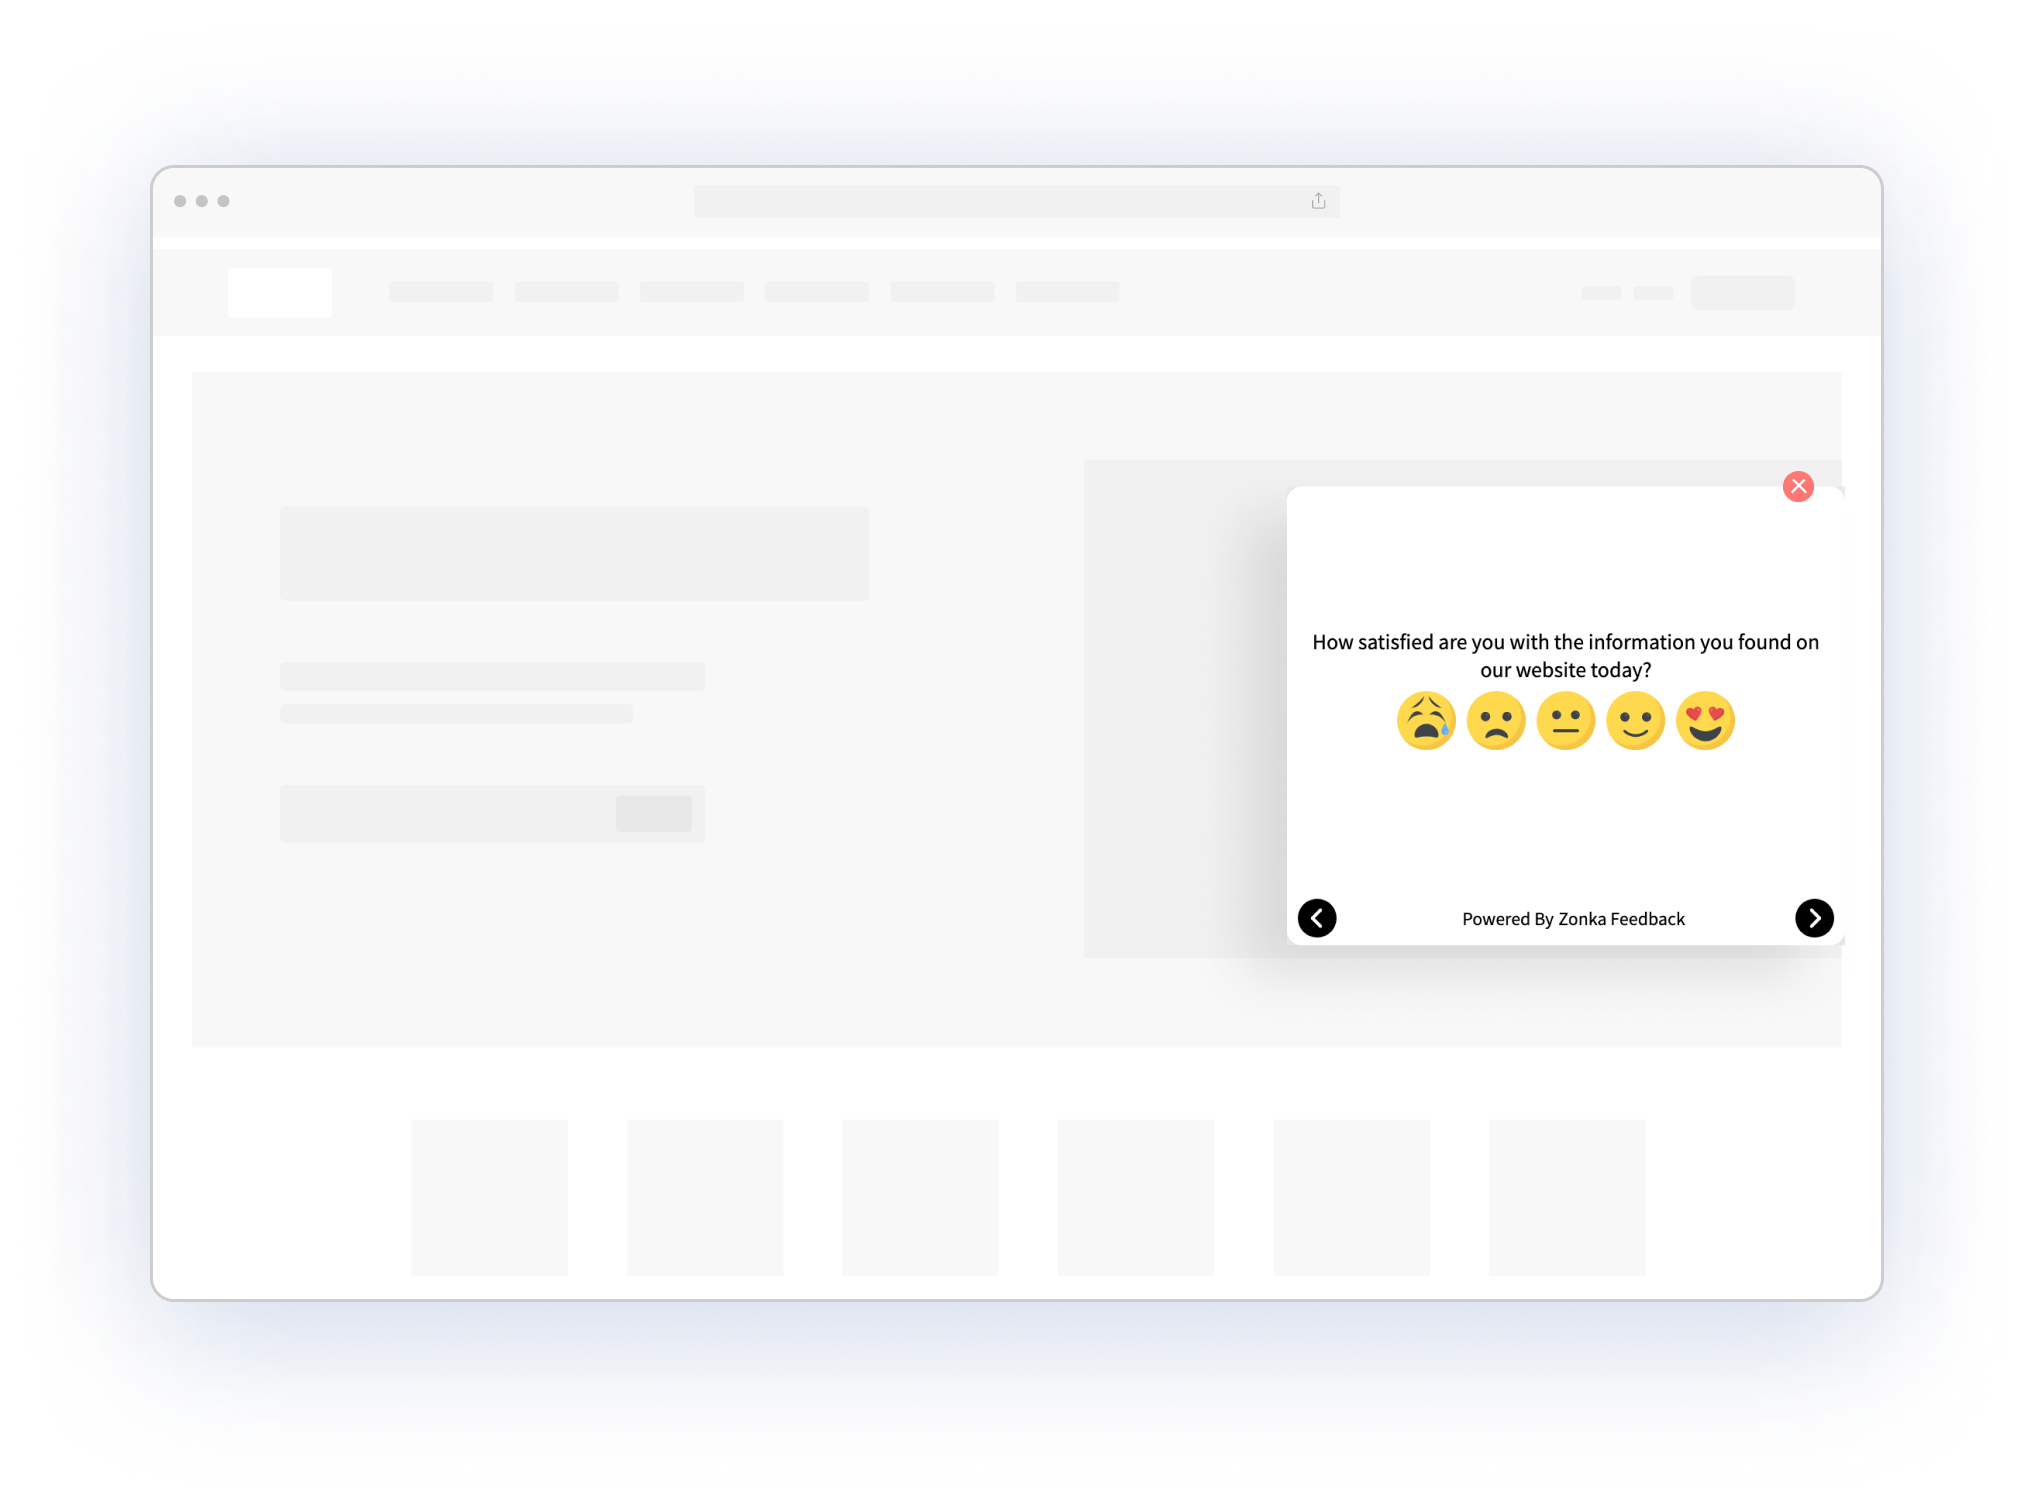 website feedback microsurvey with emoji scale to measure satisfaction with information on the website